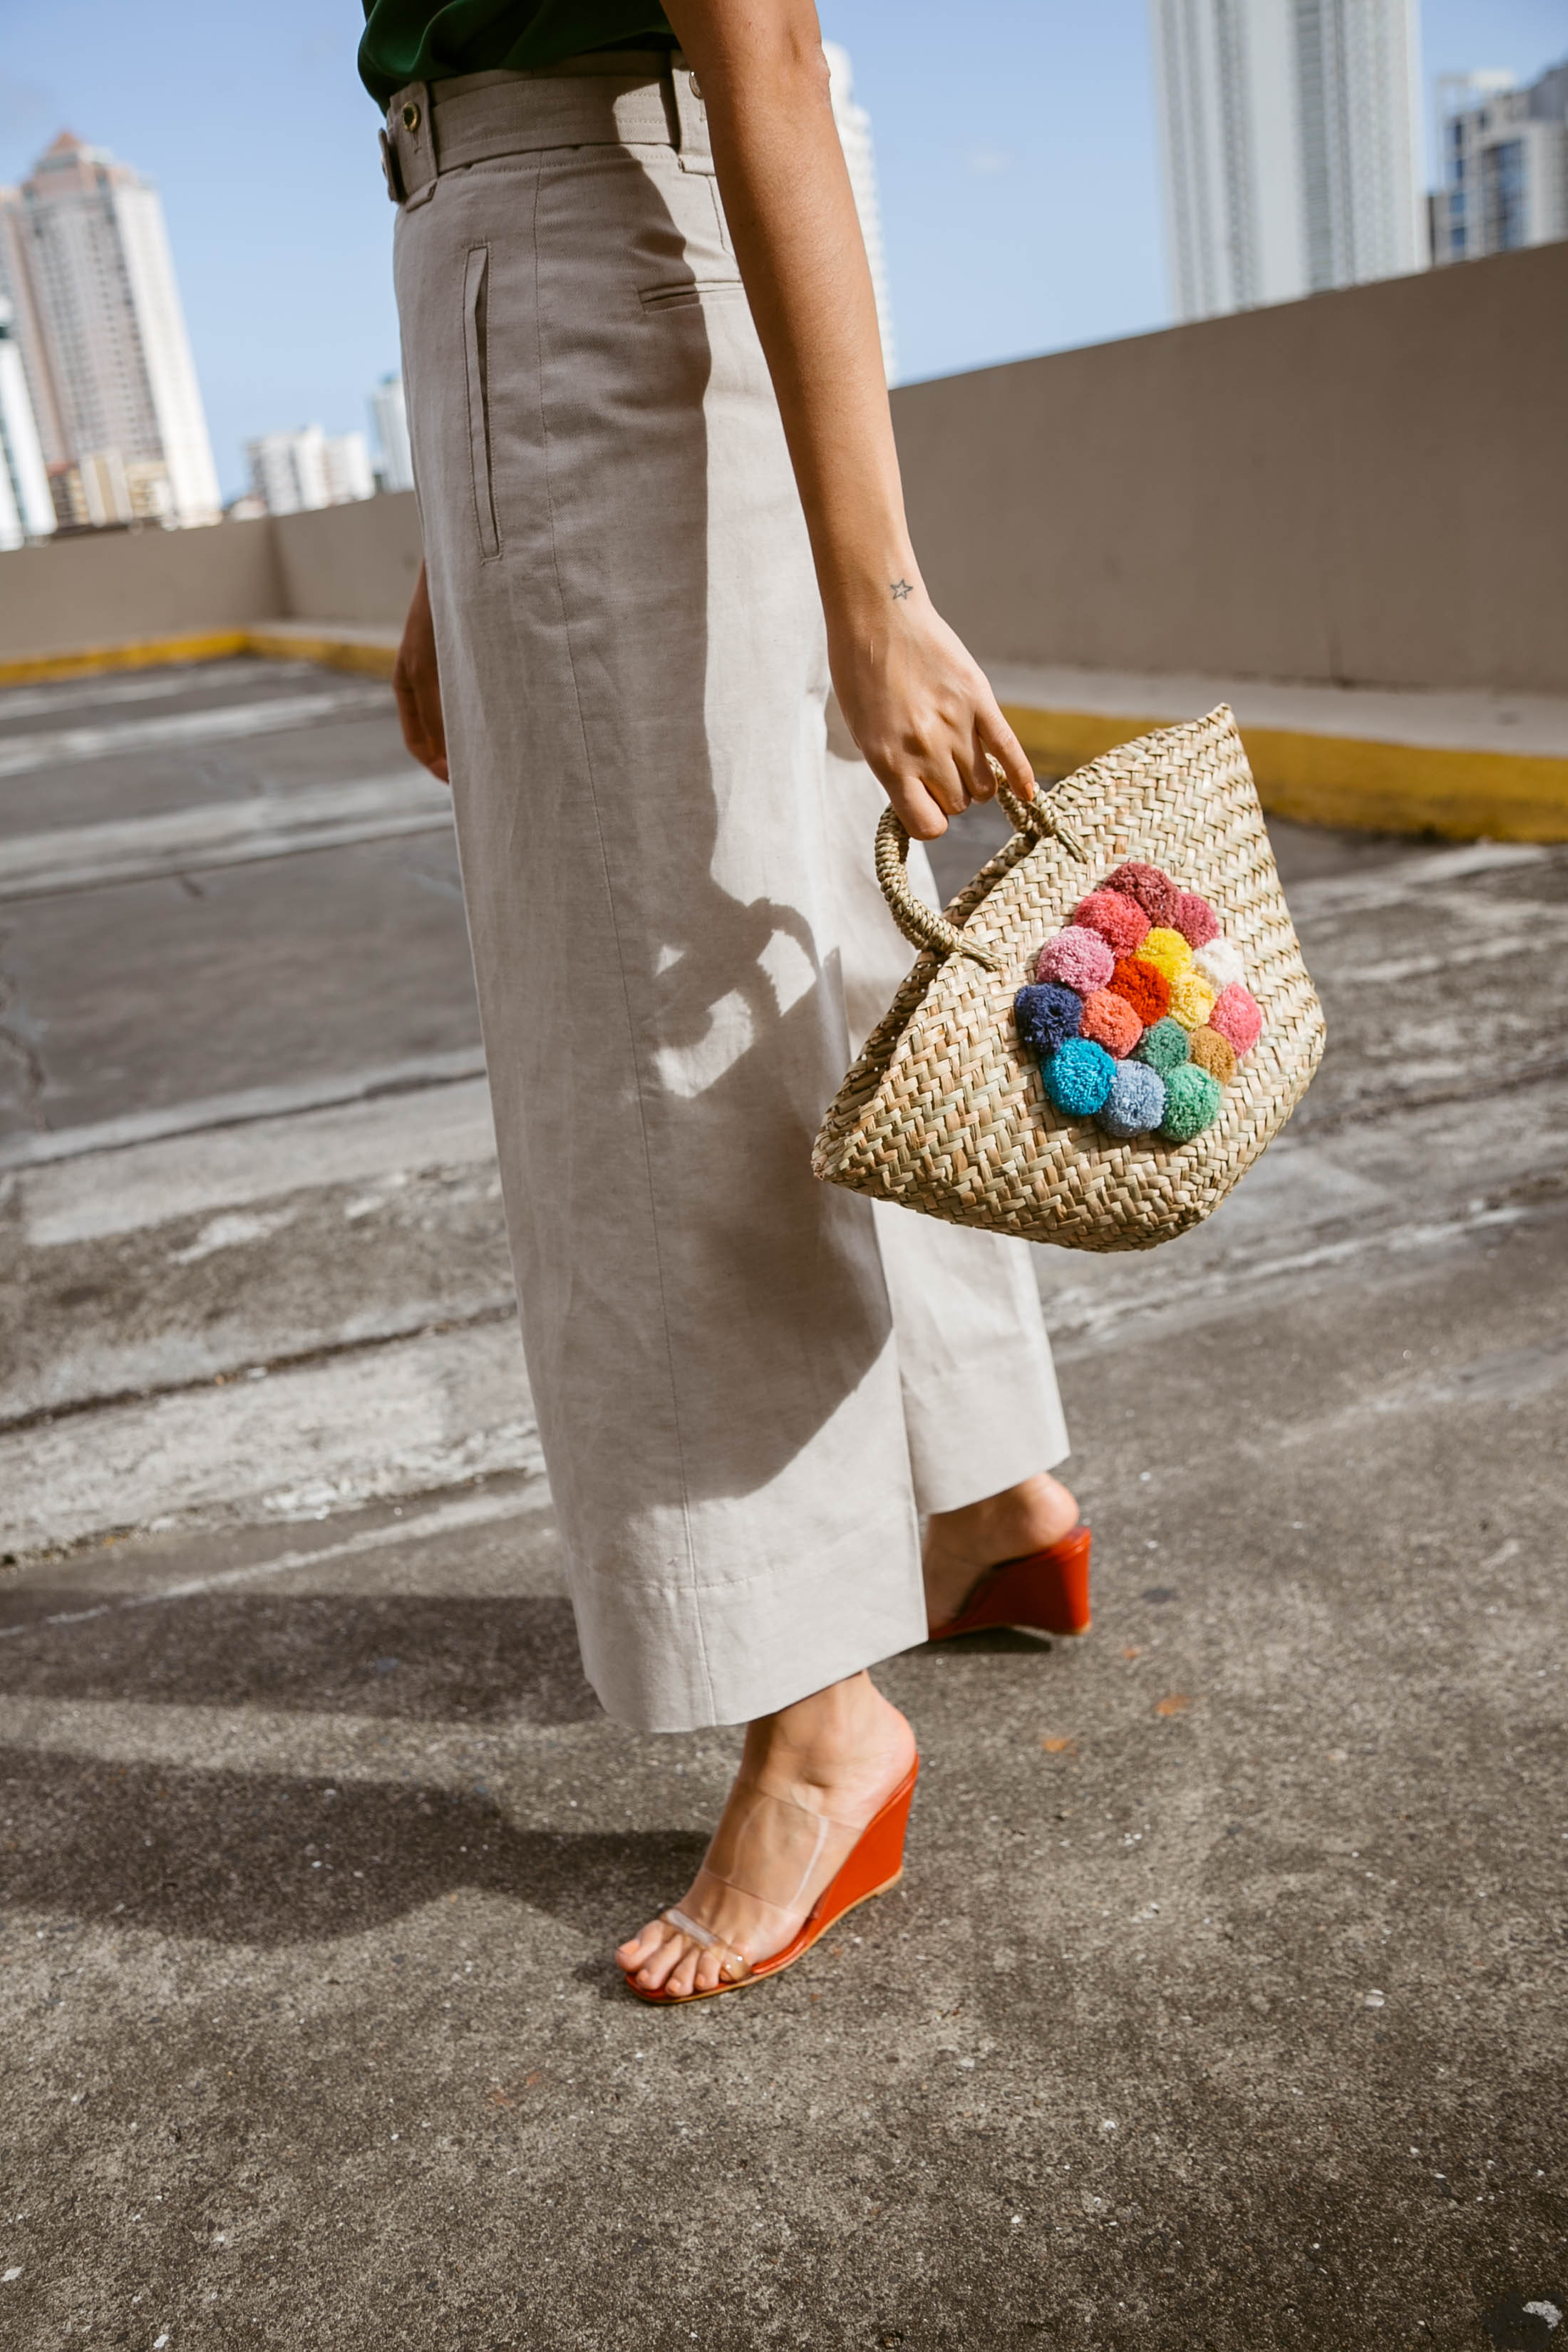 Straw bag trend for Spring 2017 by Maristella Gonzalez, Chanel Le Vernis nail polish in Beige Biege